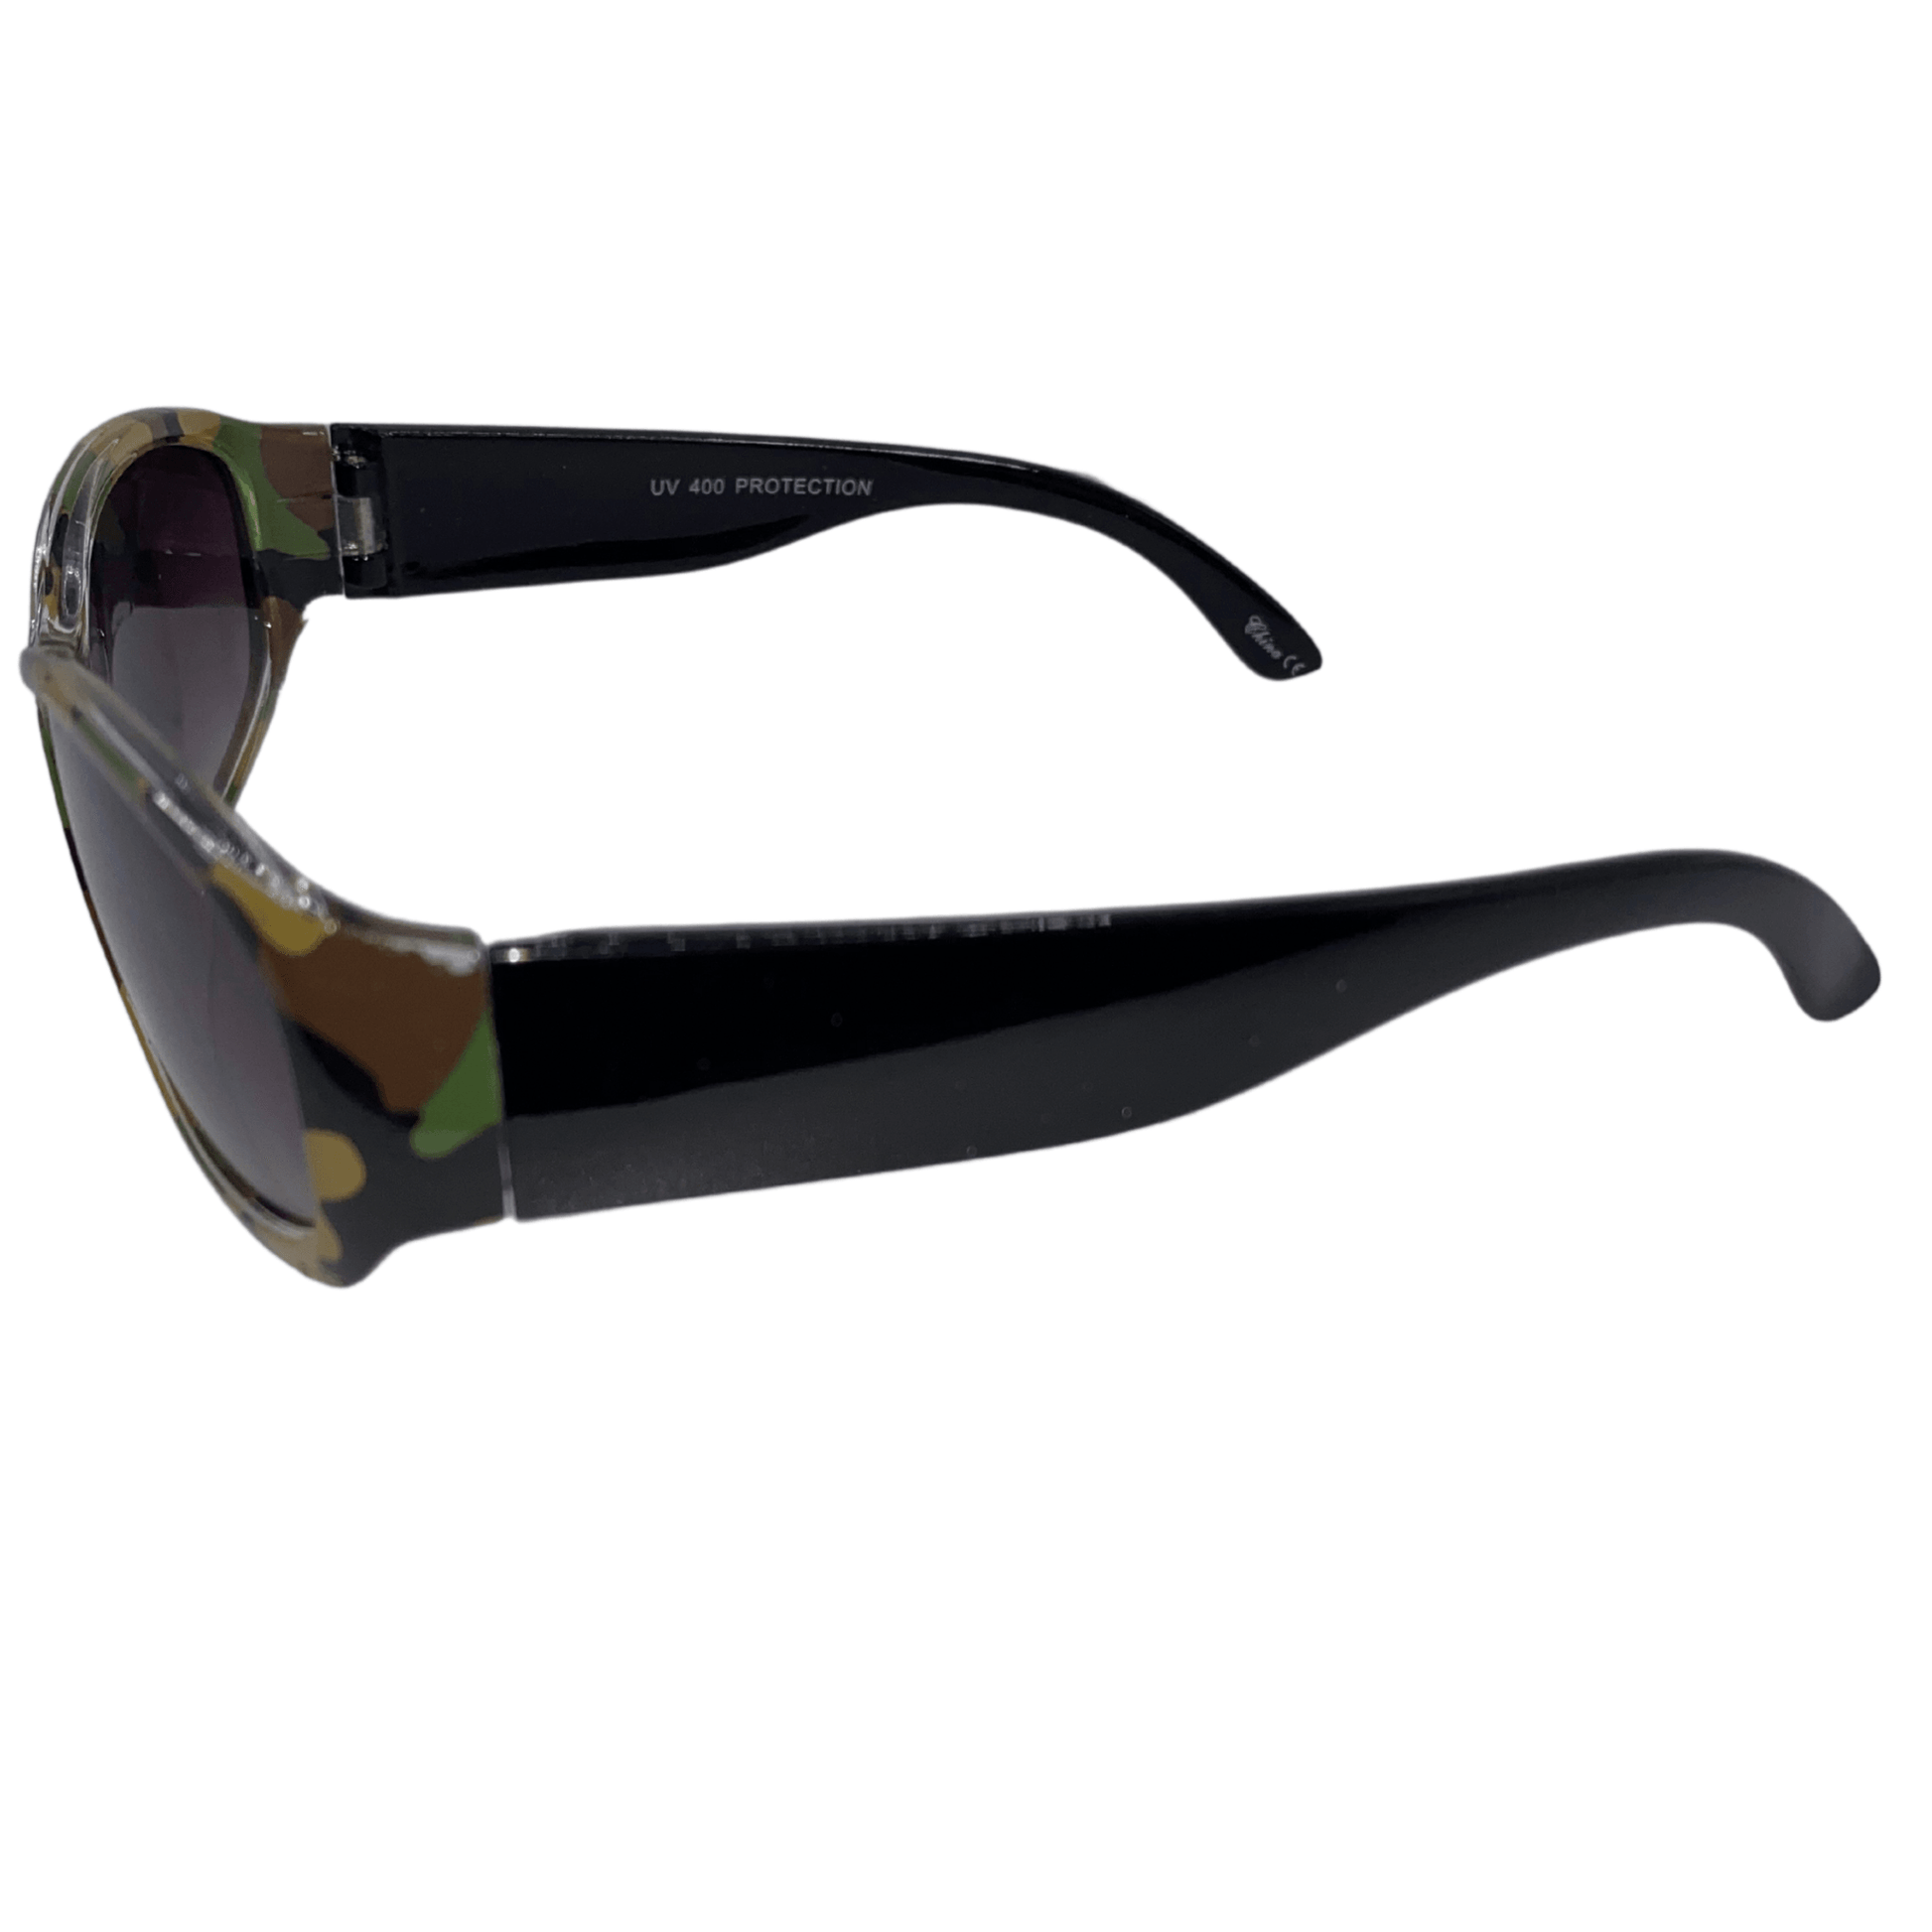 Be ready to block the sun with these green camouflage sunglasses with black arms.